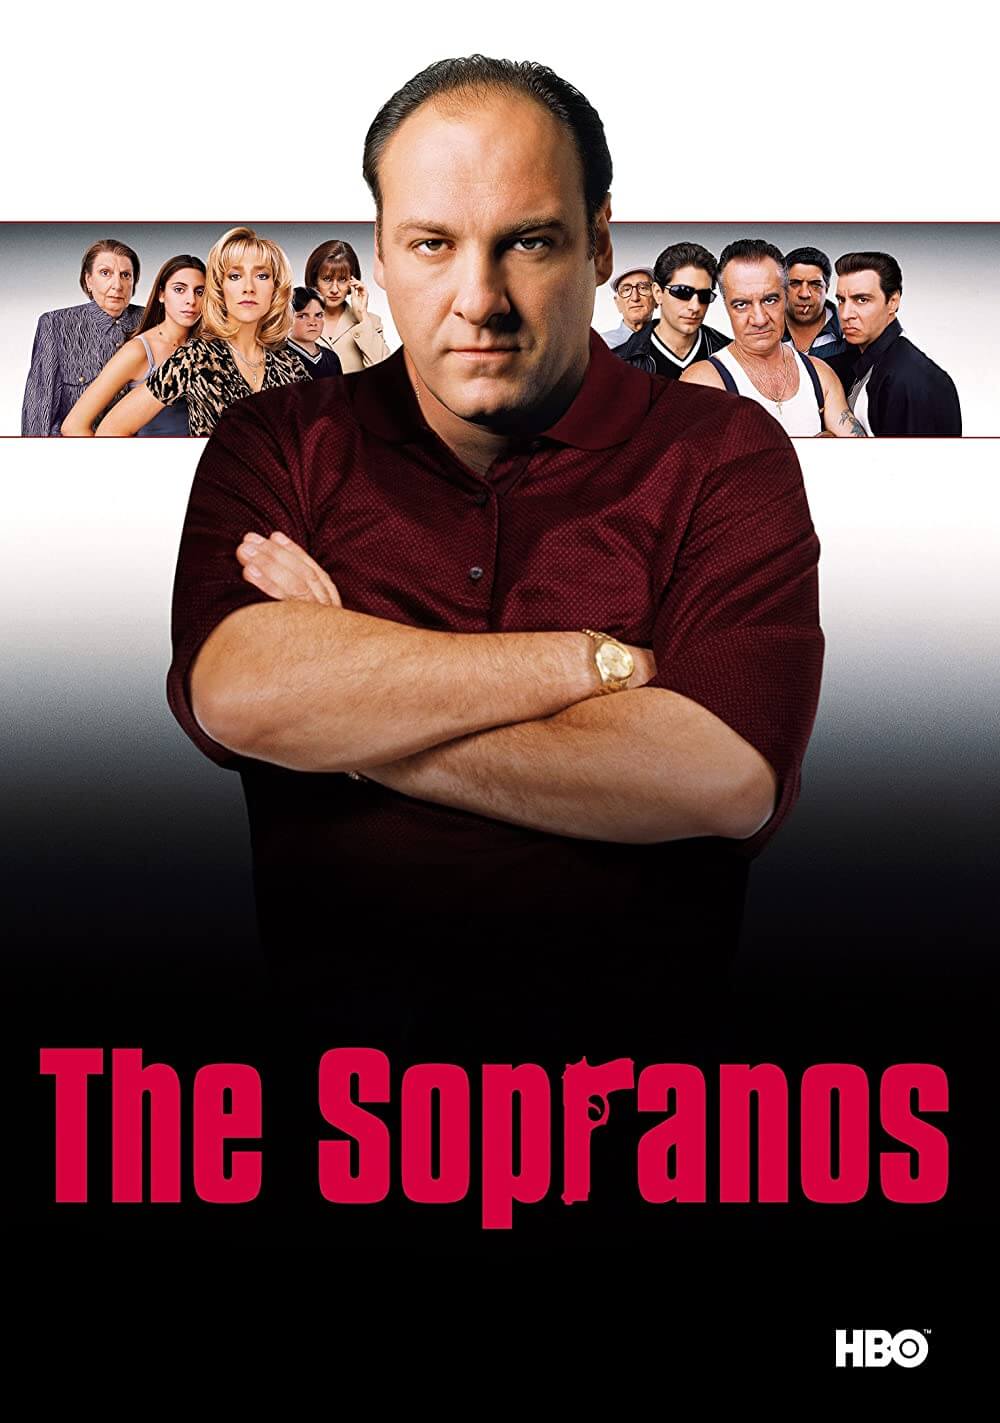 The-Sopranos-1999-2007-crave-tv-best-shows